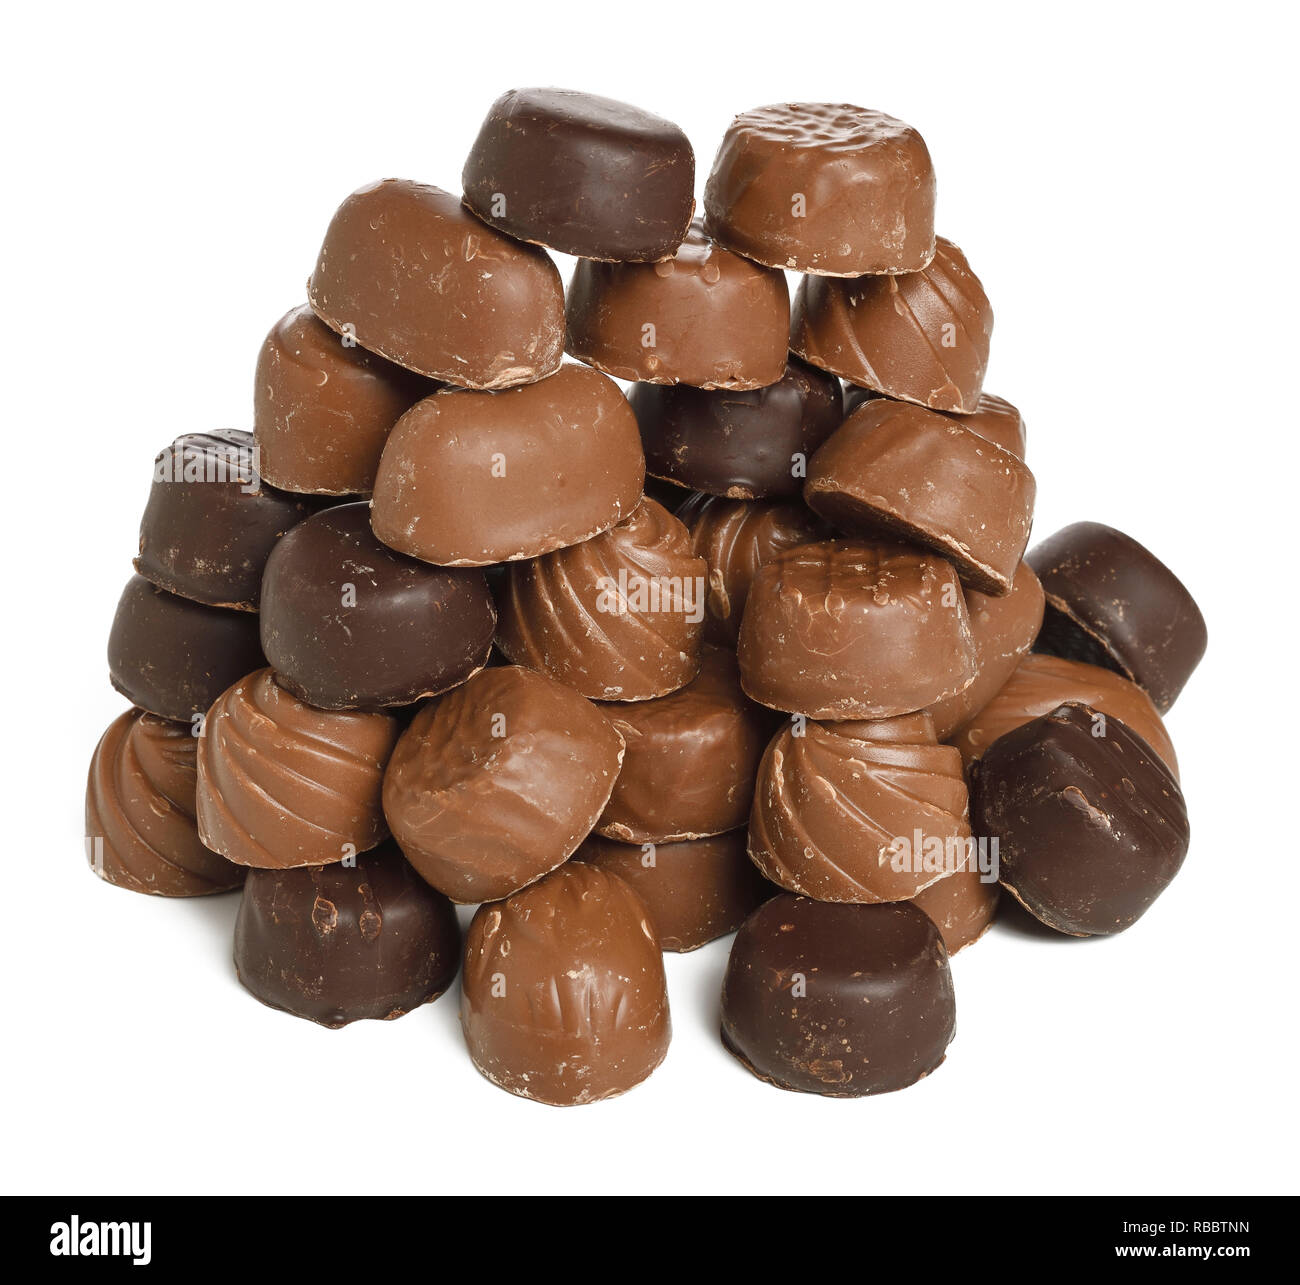 A pile of unwrapped chocolate sweets Stock Photo